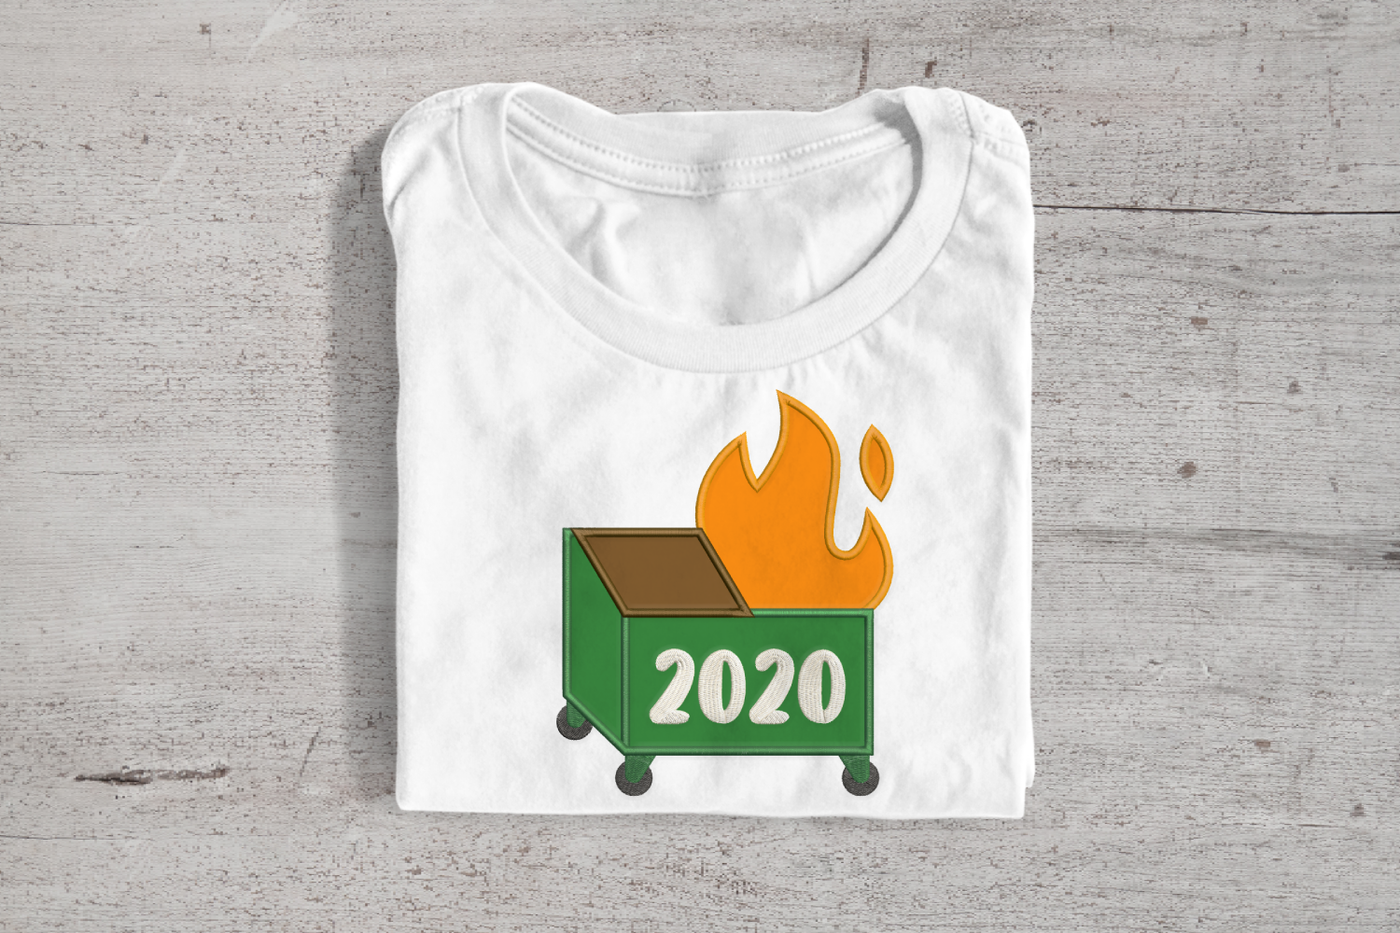 Applique of a dumpster fire that says "2020"